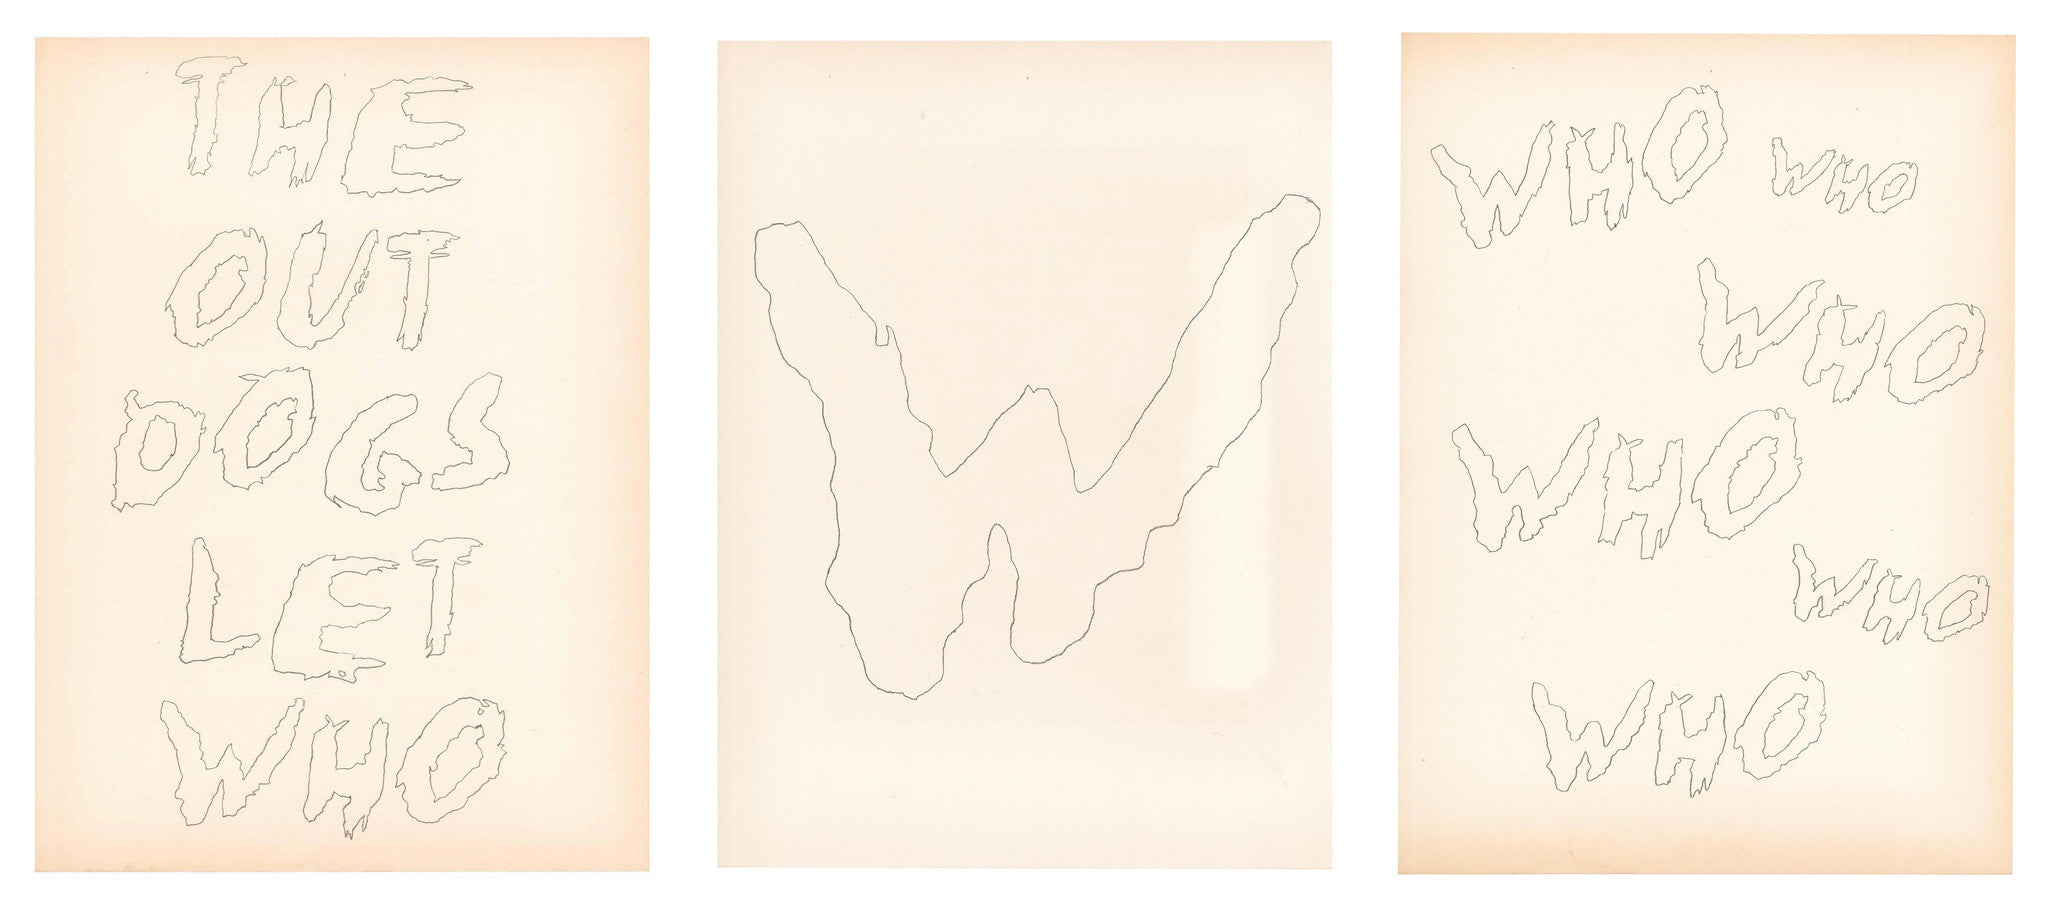 Ben Sisto, "Who (Collection of 3 Drawings)"